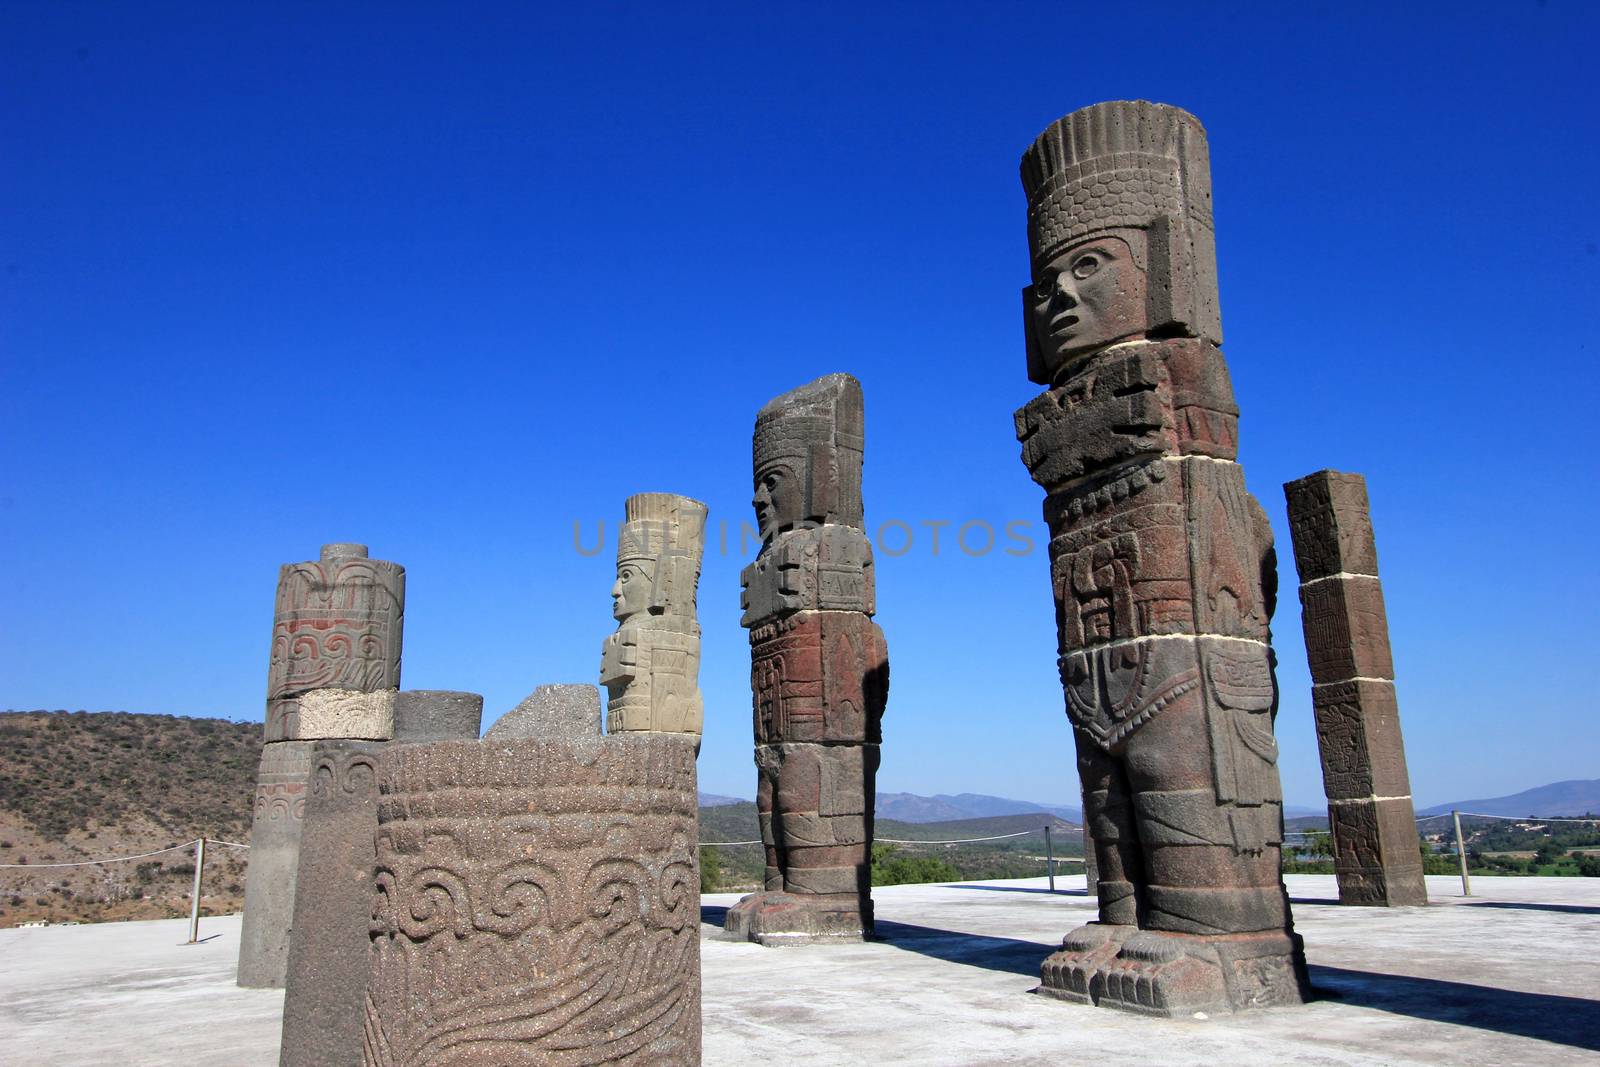 Toltec warriors columns topping the pyramid of Quetzalcoatl in Tula, mesoamerican archaeological site, Mexico